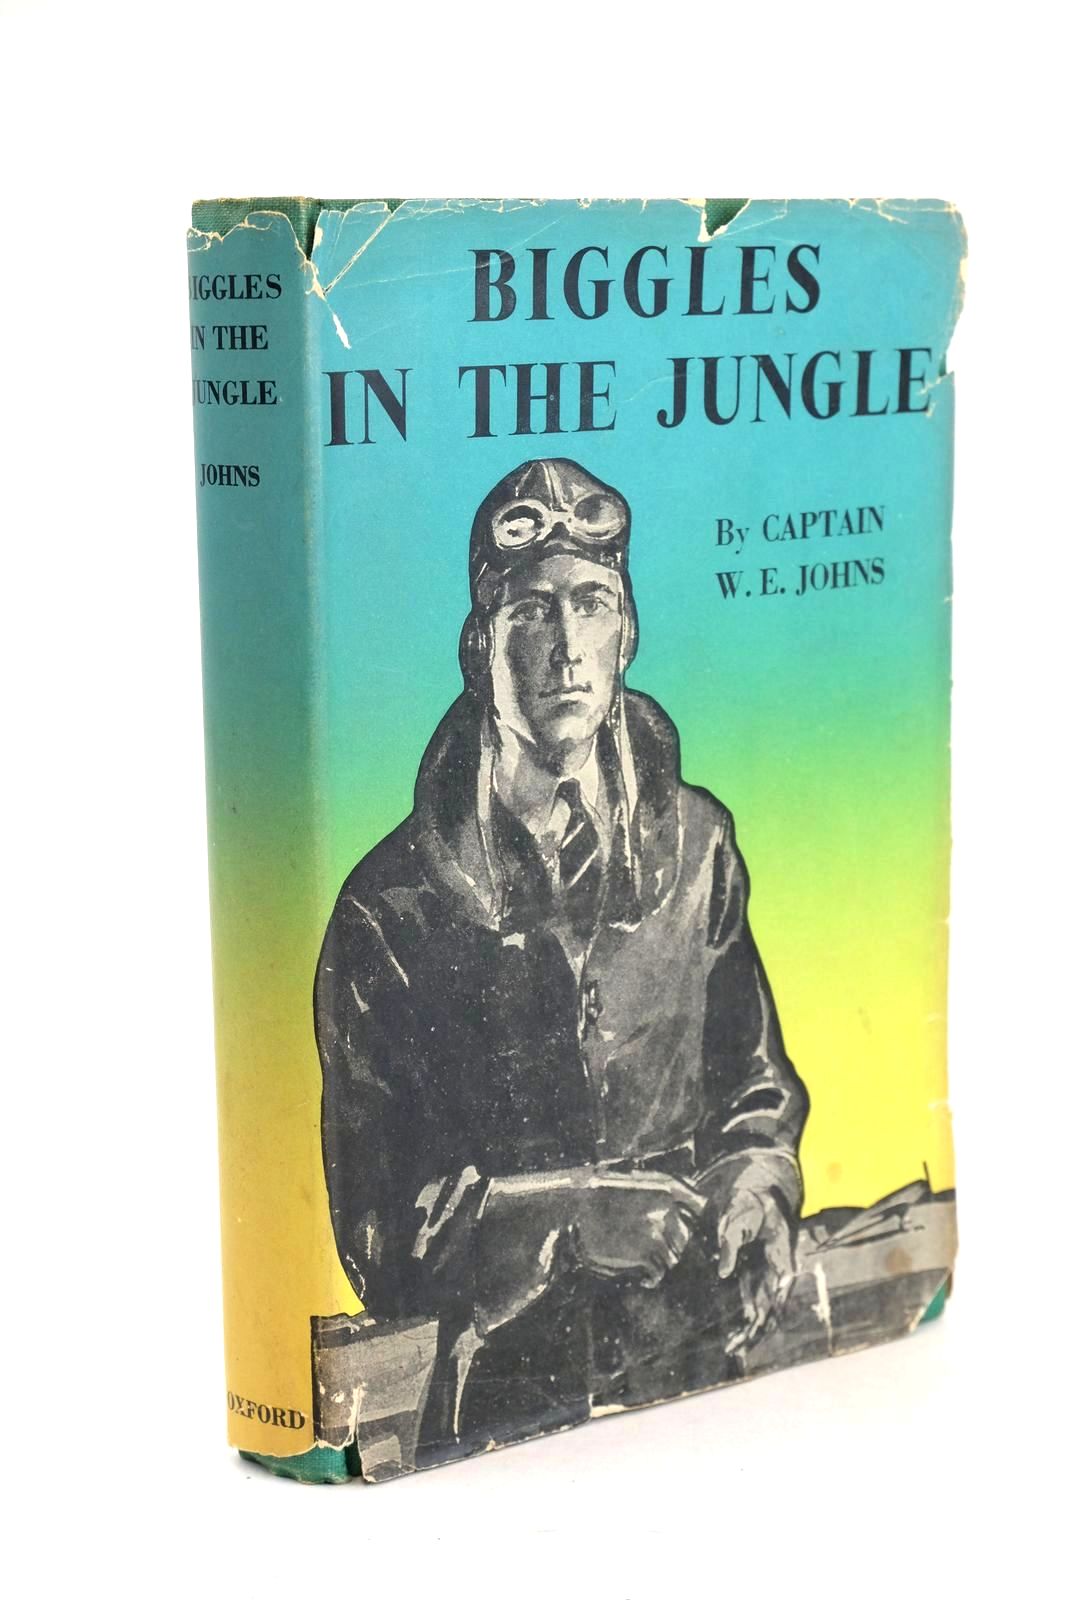 Photo of BIGGLES IN THE JUNGLE written by Johns, W.E. illustrated by Cuneo, Terence published by Oxford University Press, Geoffrey Cumberlege (STOCK CODE: 1326287)  for sale by Stella & Rose's Books